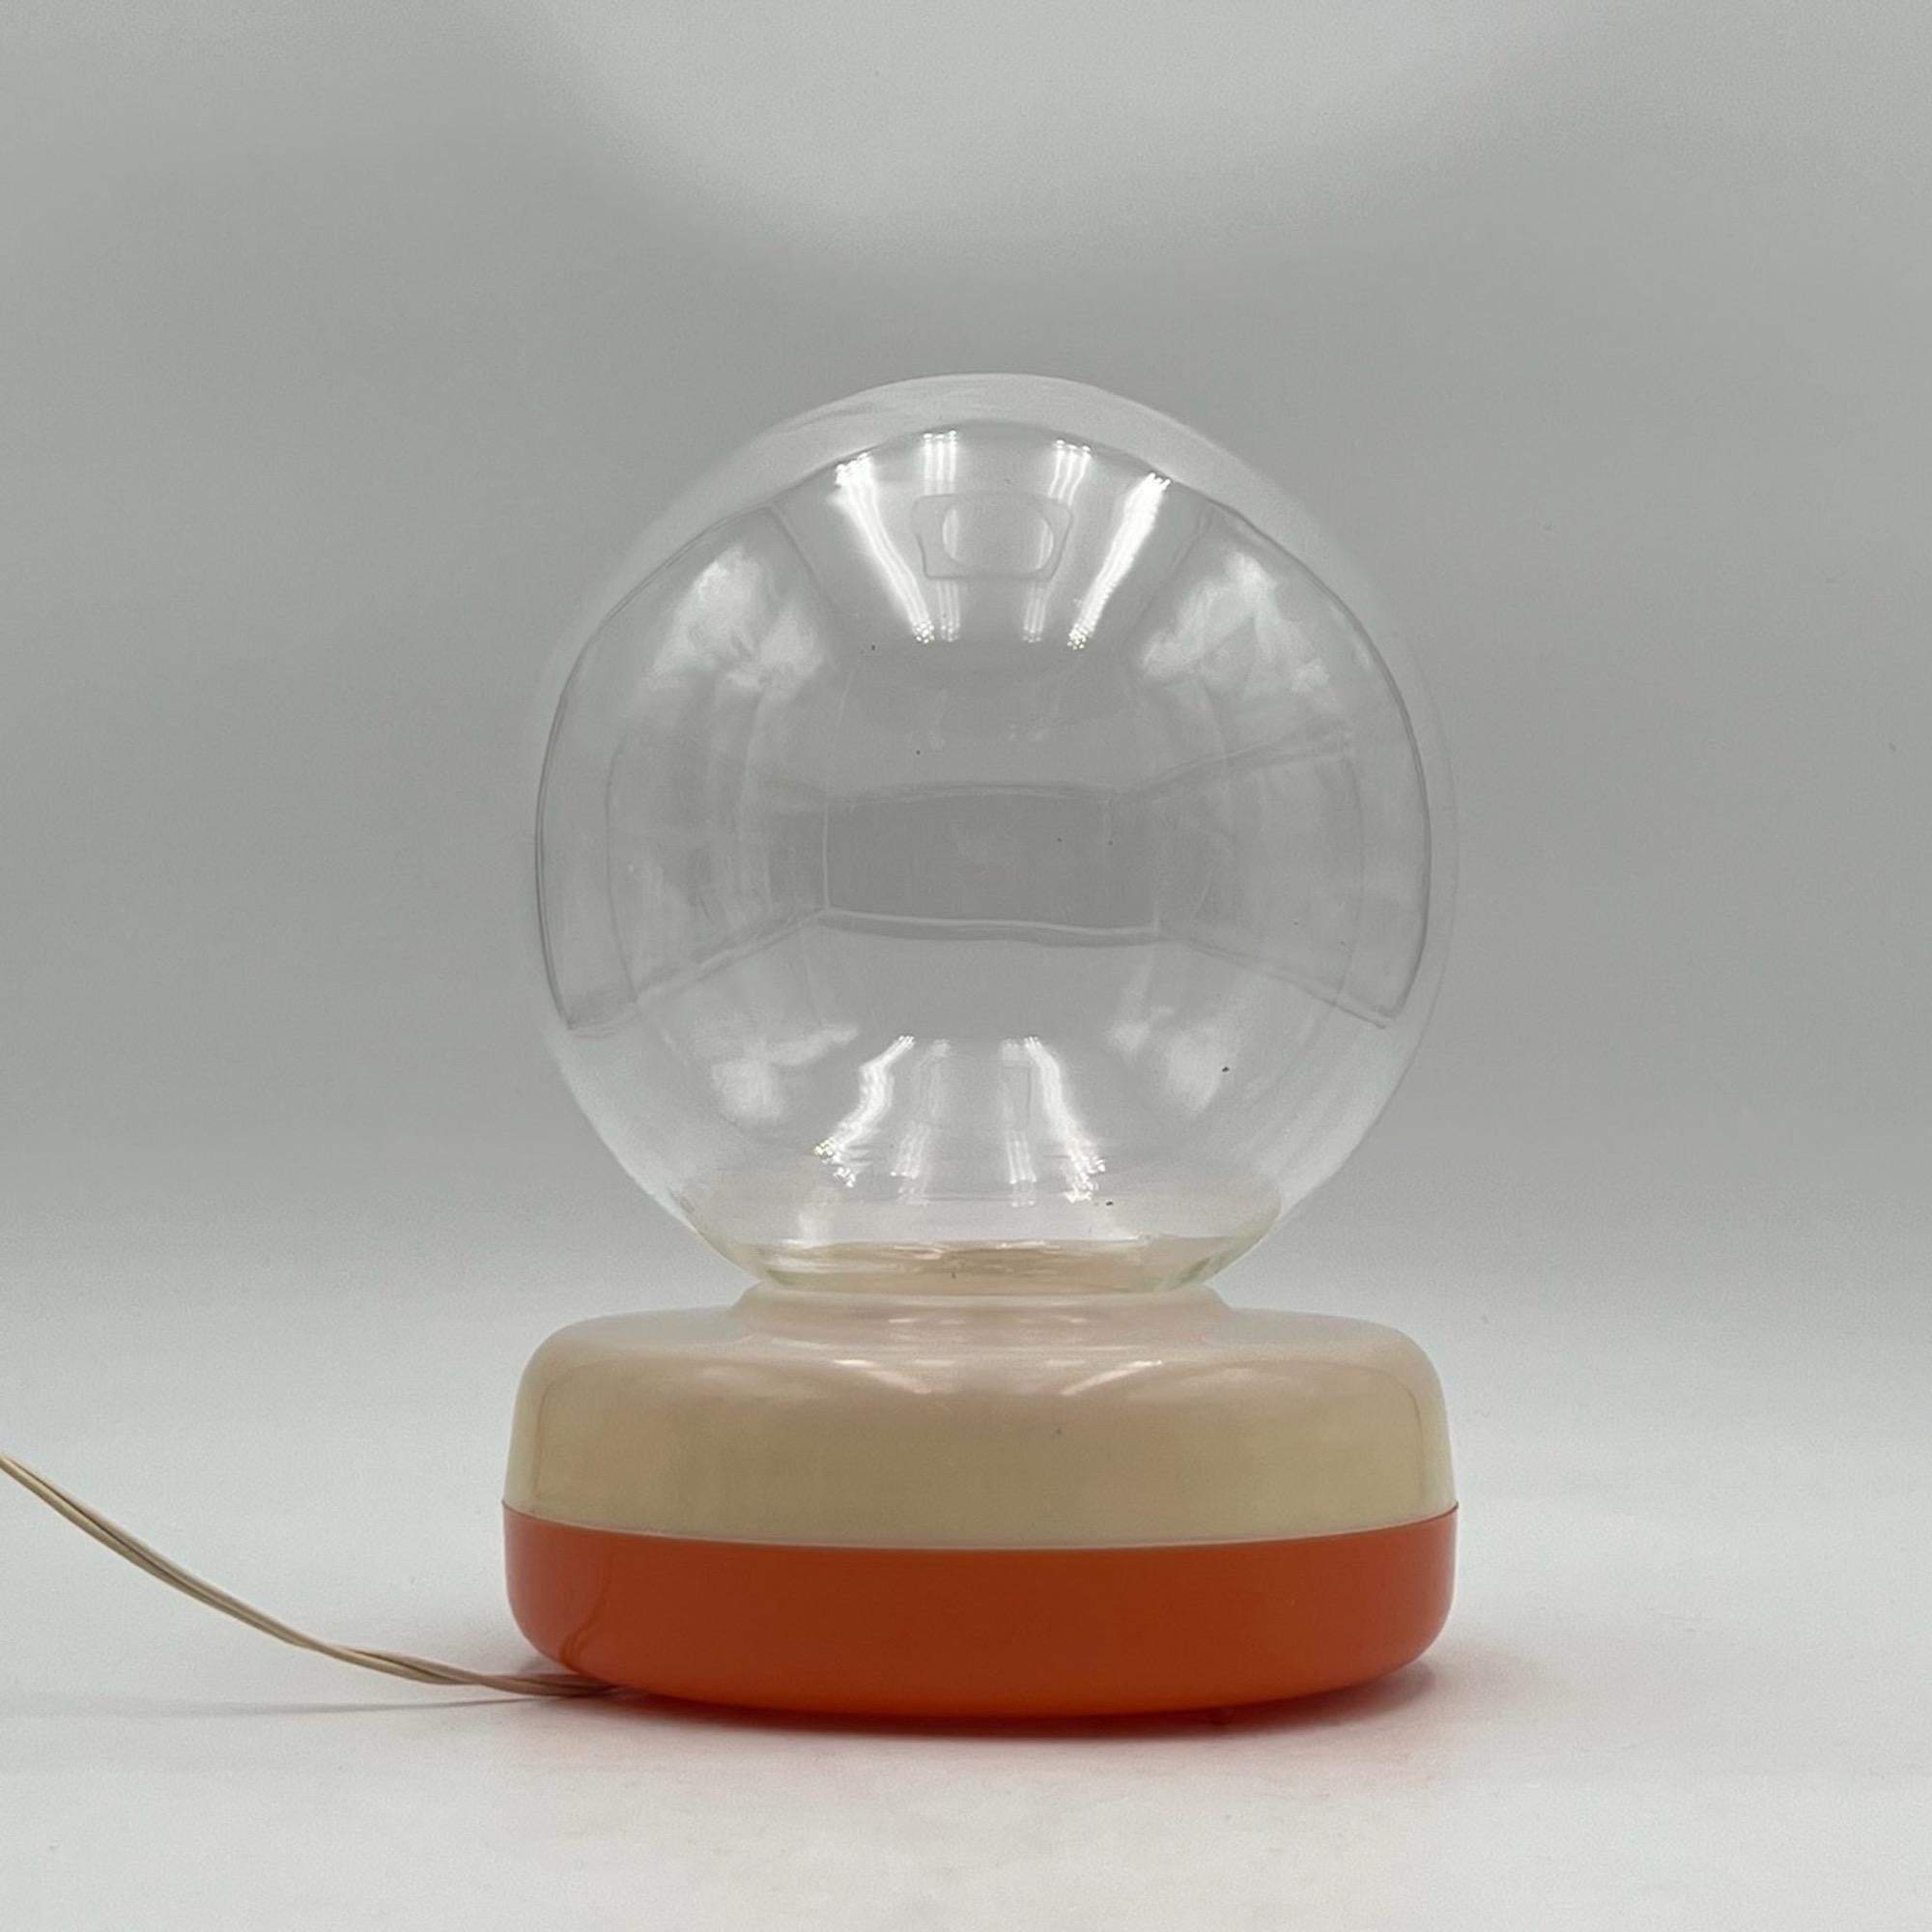 Distinctive and very rare lamp with a beige / orange plastic base holder topped by a big clear glass bowl.

The base made of translucent plastic contains a soft E14 bulb for ambient lighting. The glass globe is equipped with a plastic support that